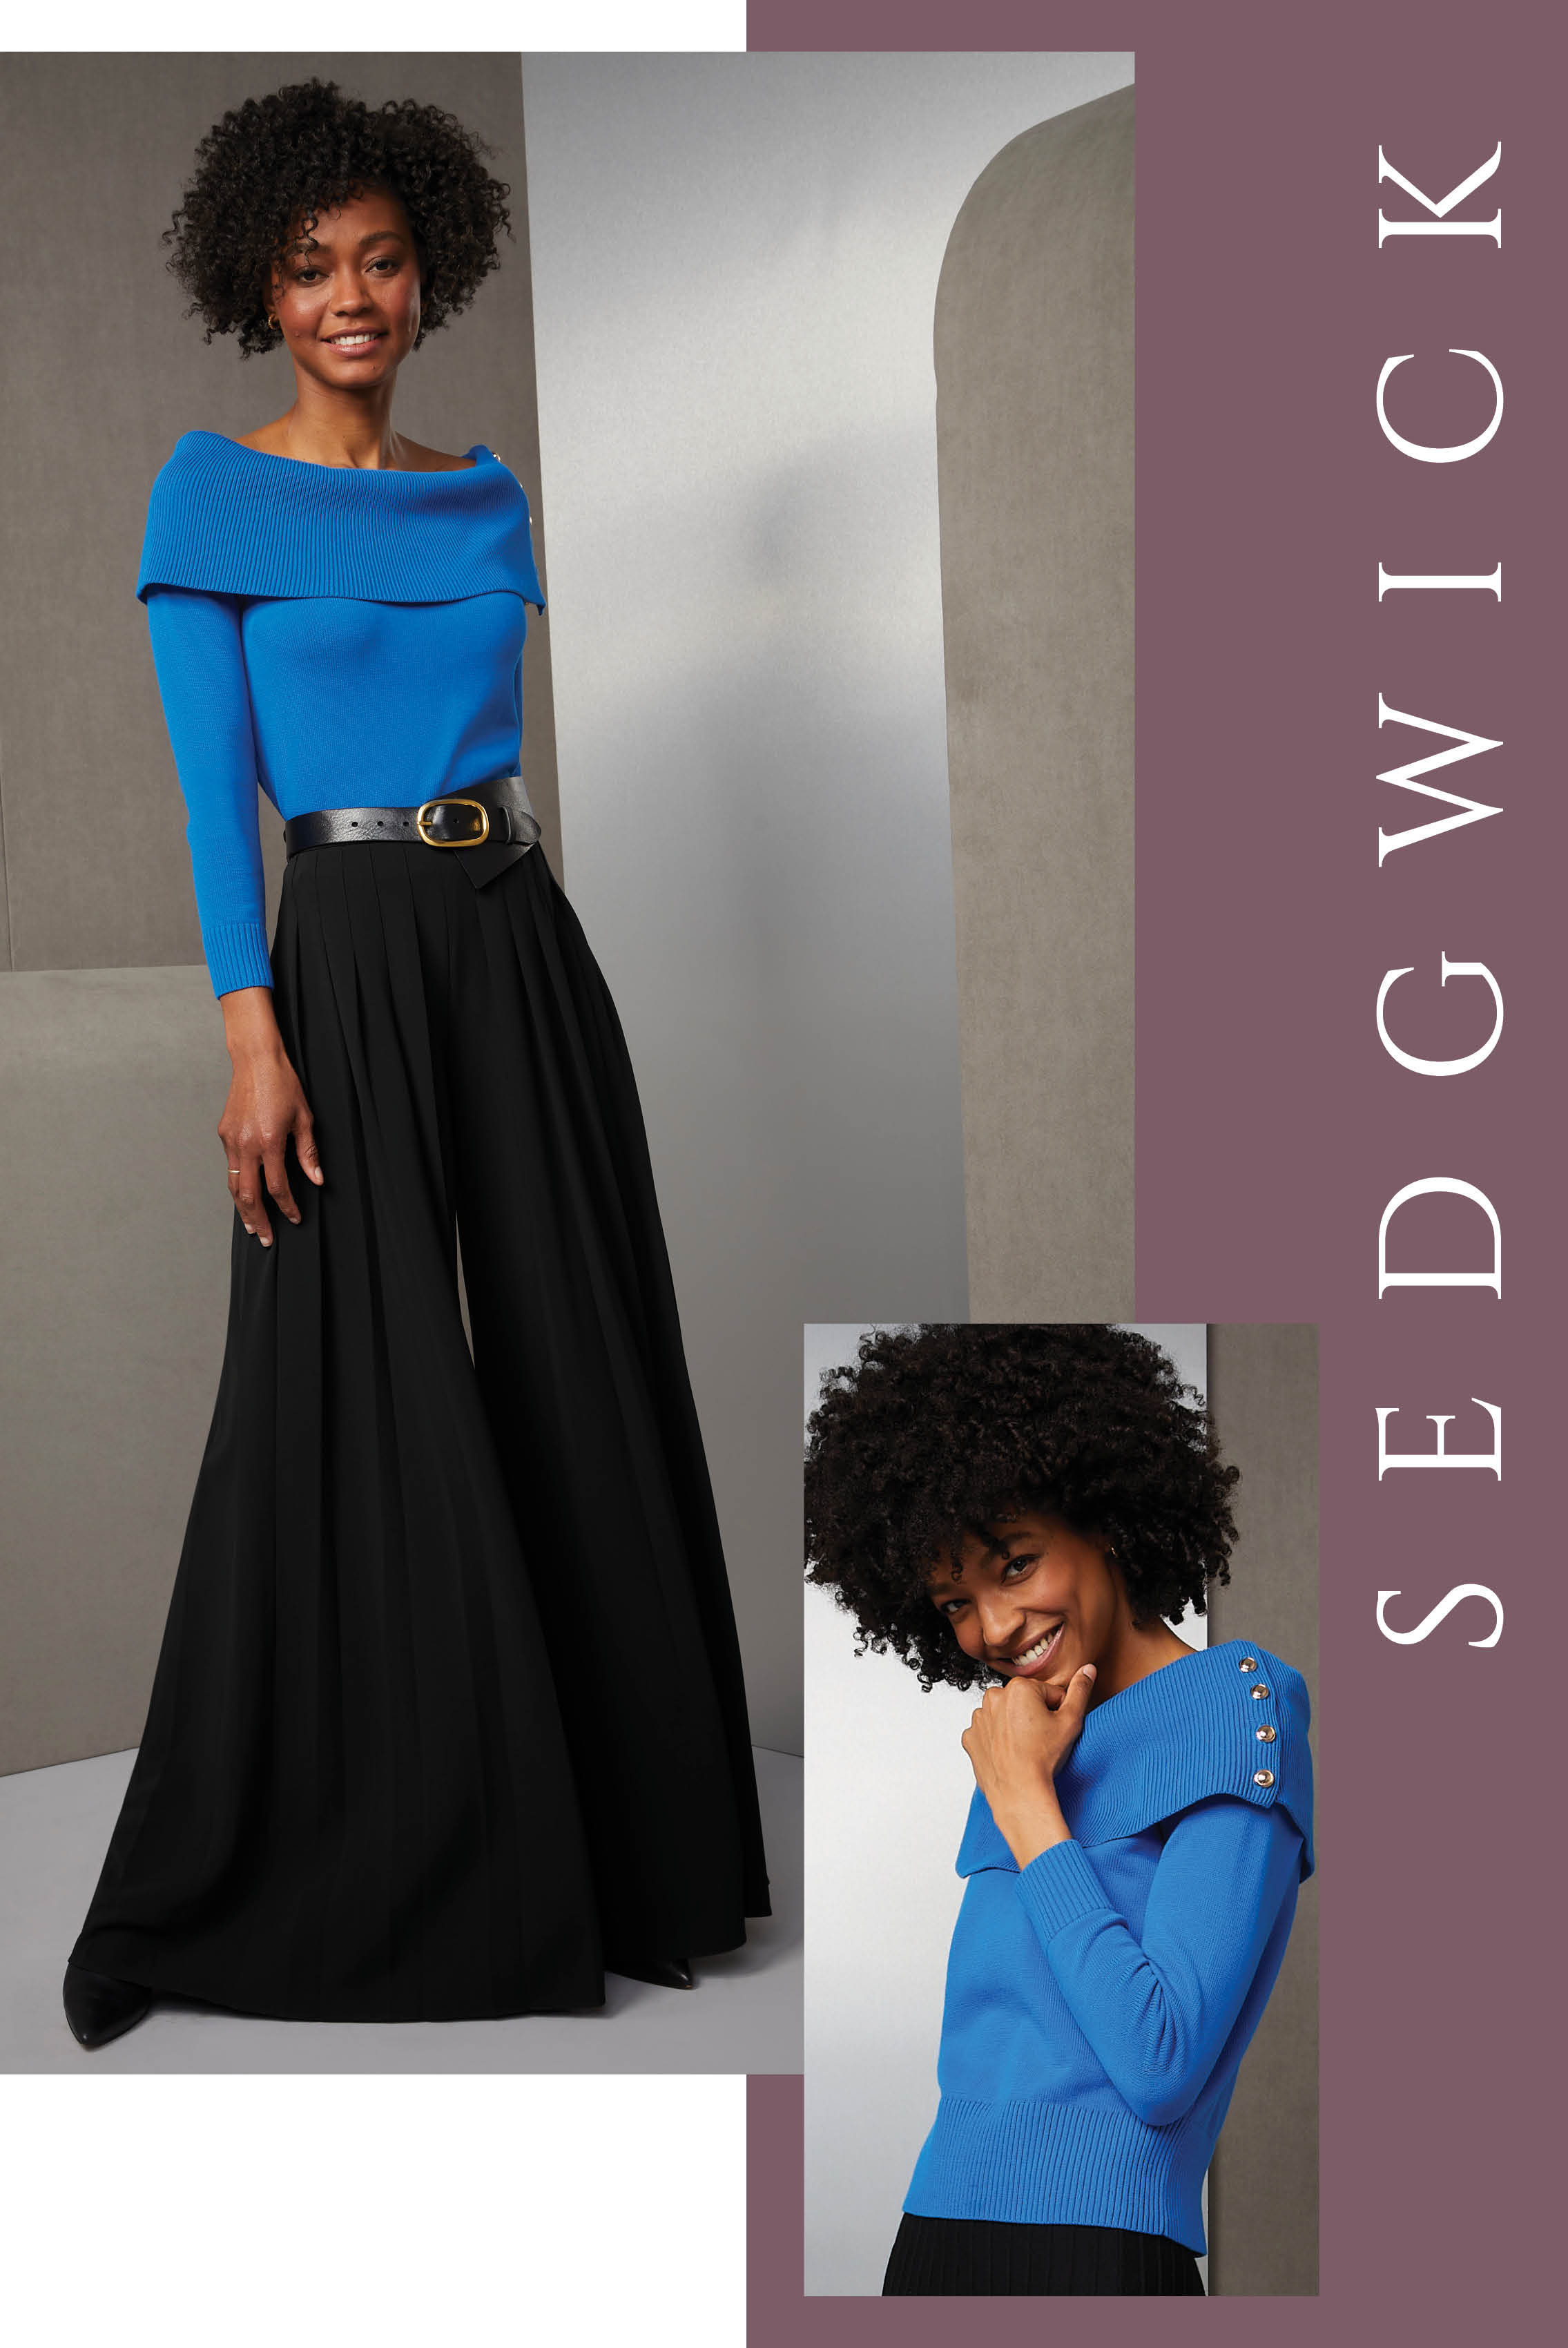 Indulge in the trend for dramatic upscaling. This electric blue cotton sweater can be styled with the oversized cowl neck pulled down to the shoulders or on top as a loose funnel.